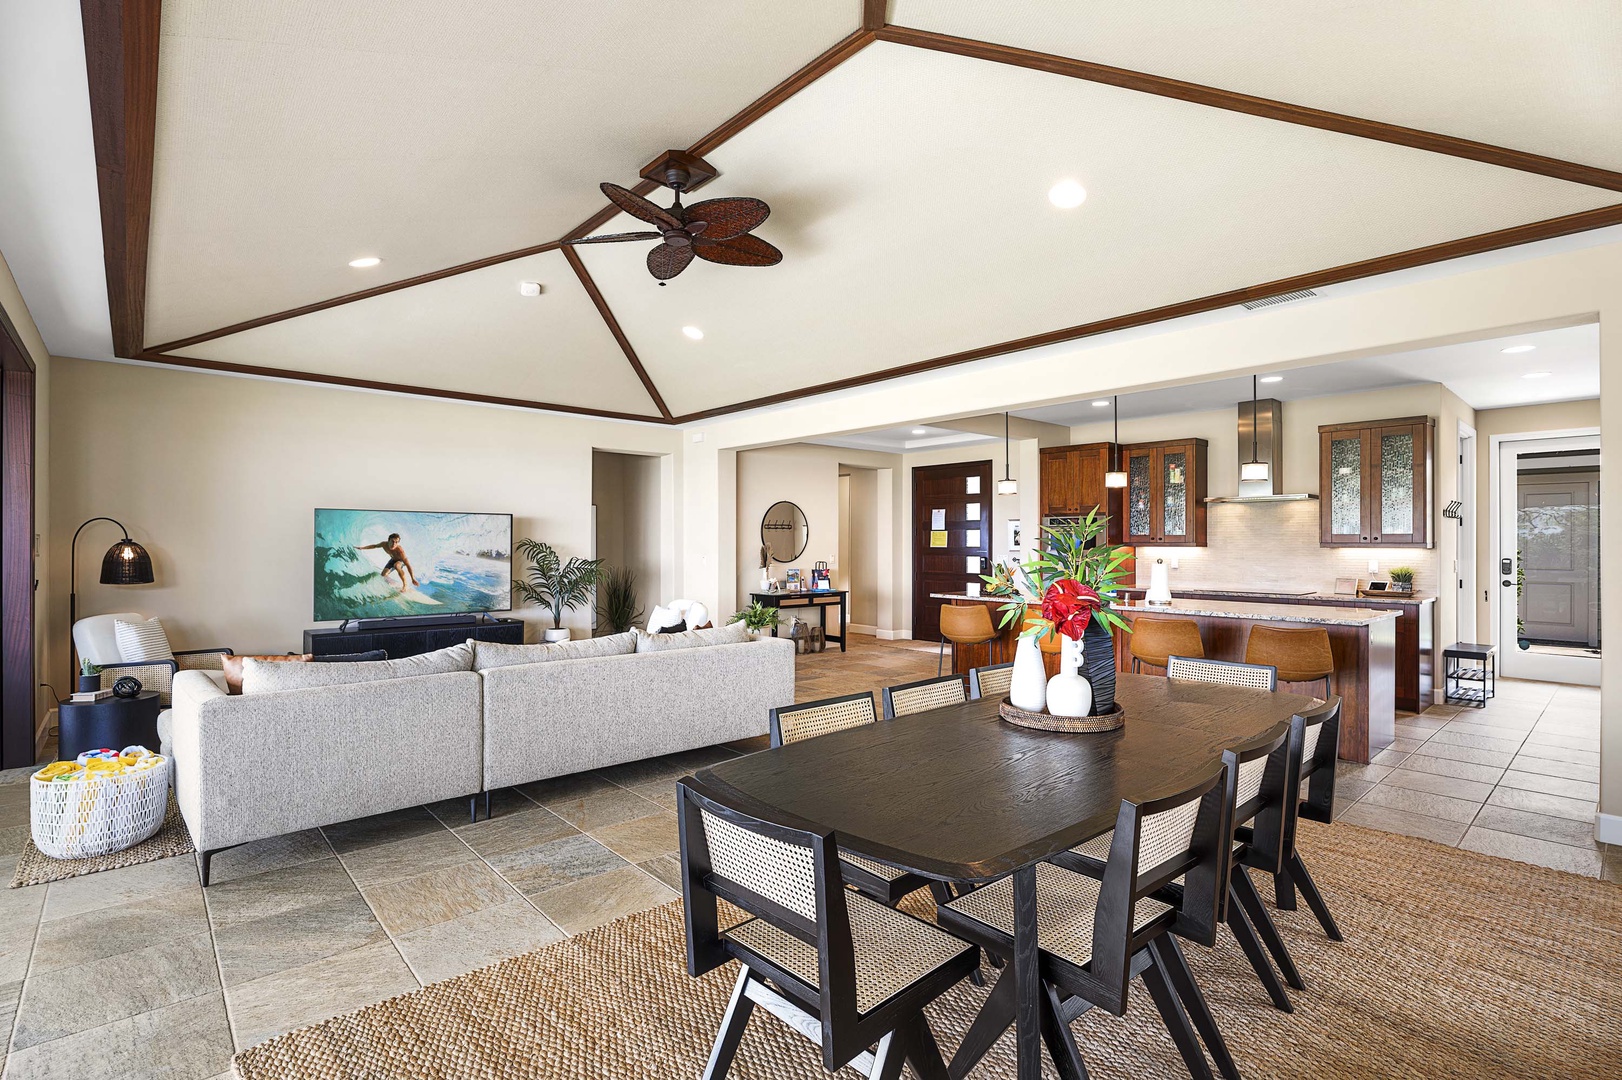 Kailua Kona Vacation Rentals, Holua Kai #27 - Vaulted ceiling with central A/C and ceiling fan